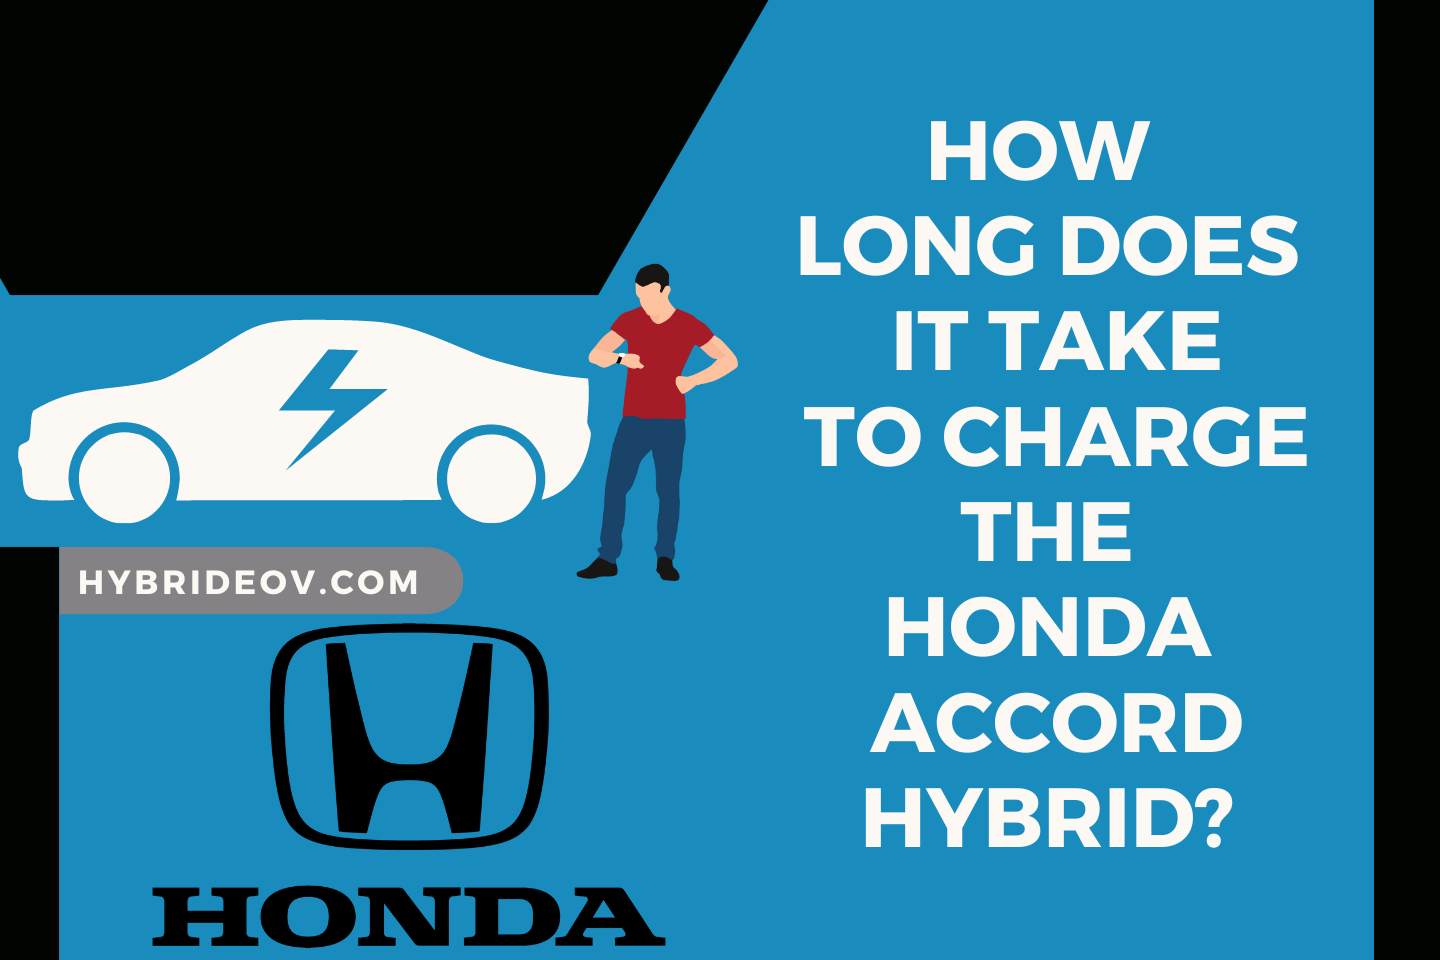 How Long does It Take to Charge the Honda Accord Hybrid